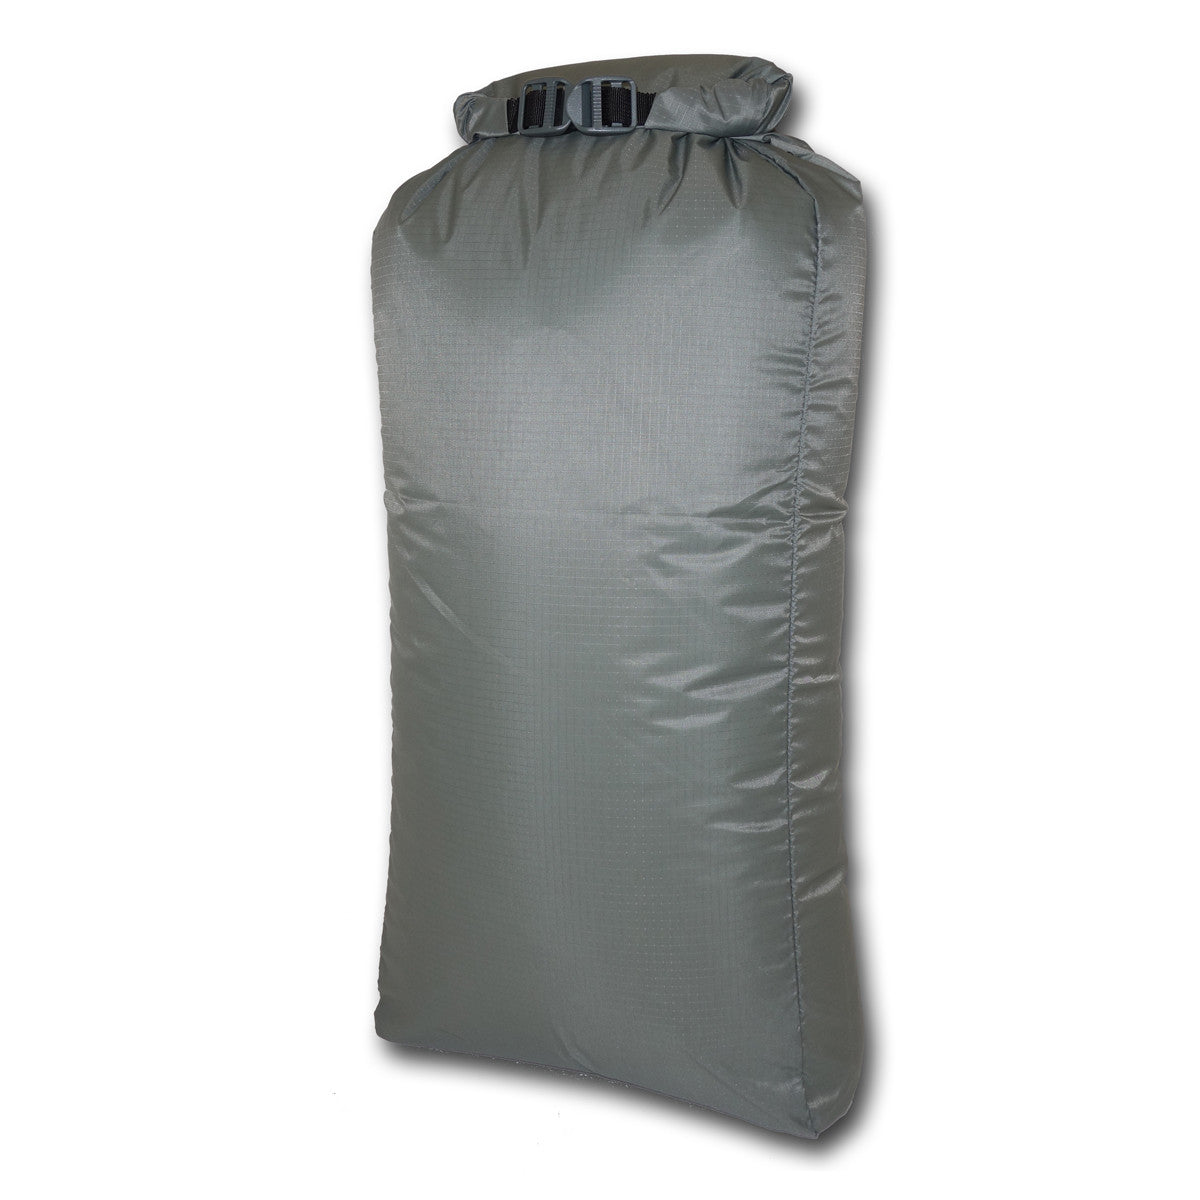 Stone Glacier Load Cell Dry Bag in Stone Glacier Load Cell Dry Bag - goHUNT Shop by GOHUNT | Stone Glacier - GOHUNT Shop